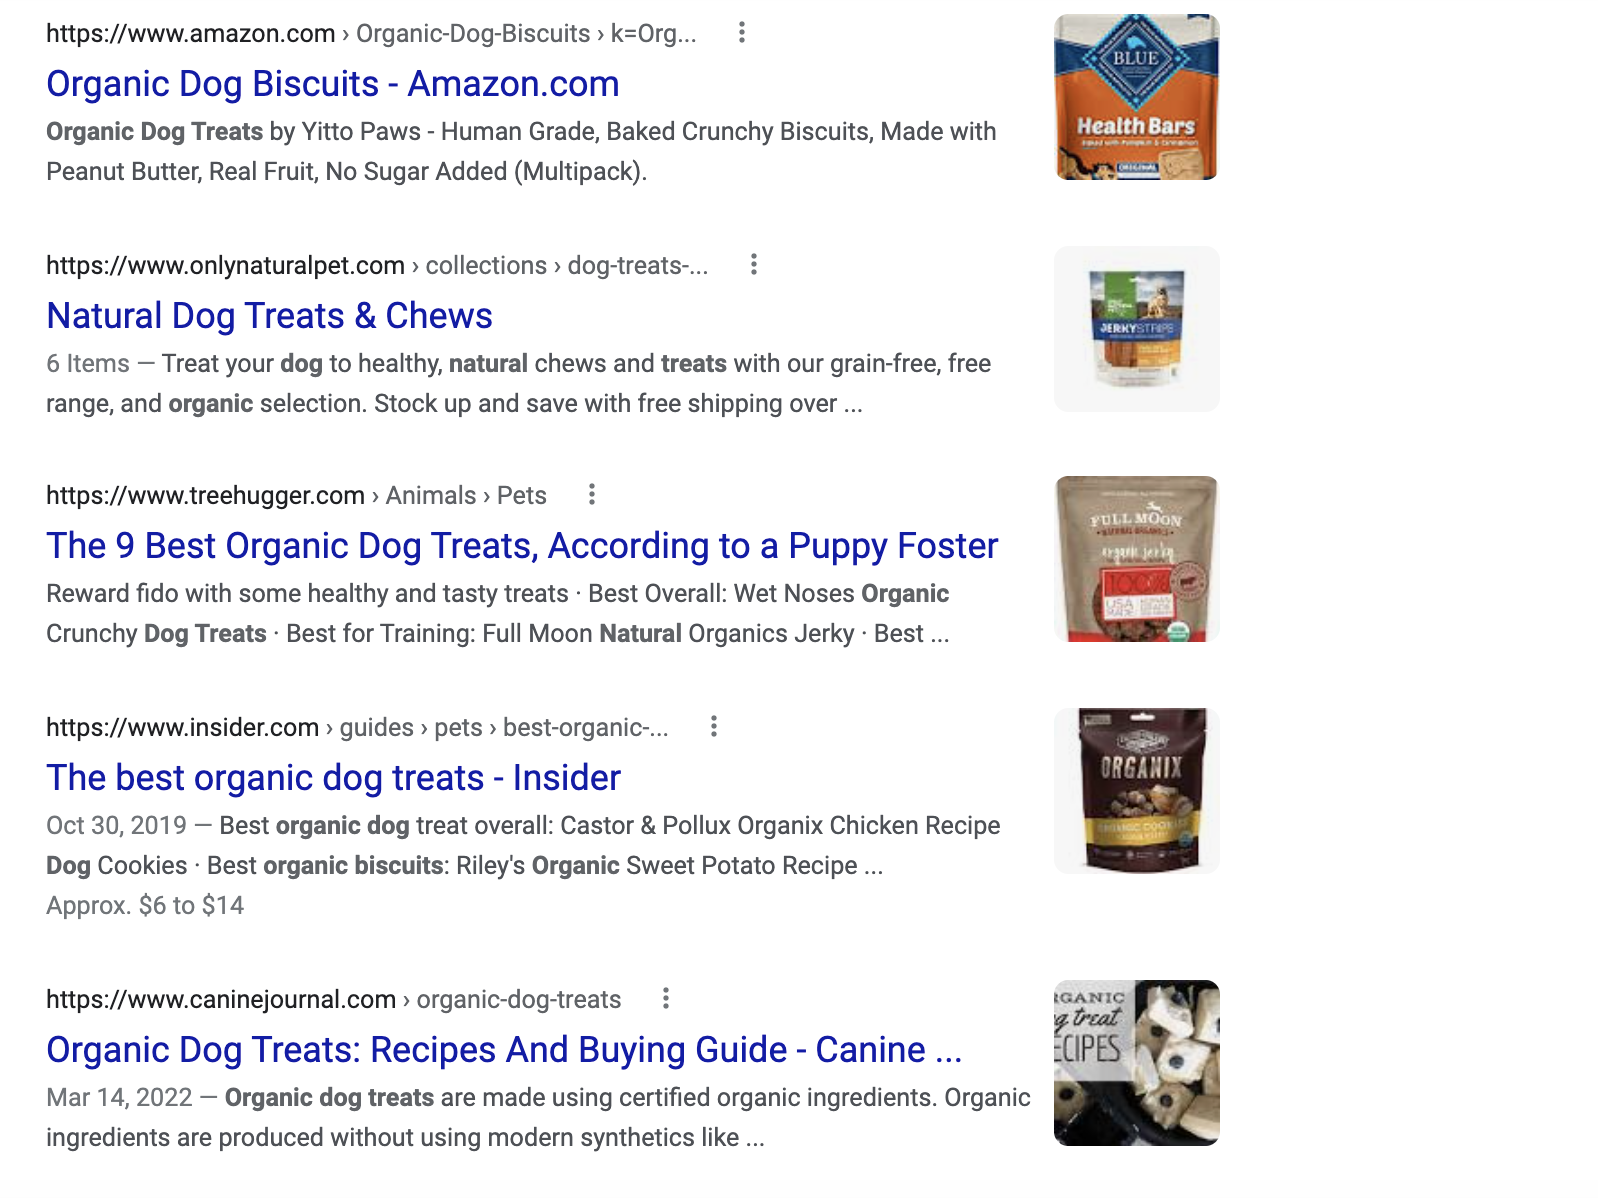 Google's first page search results for “organic dog treats"